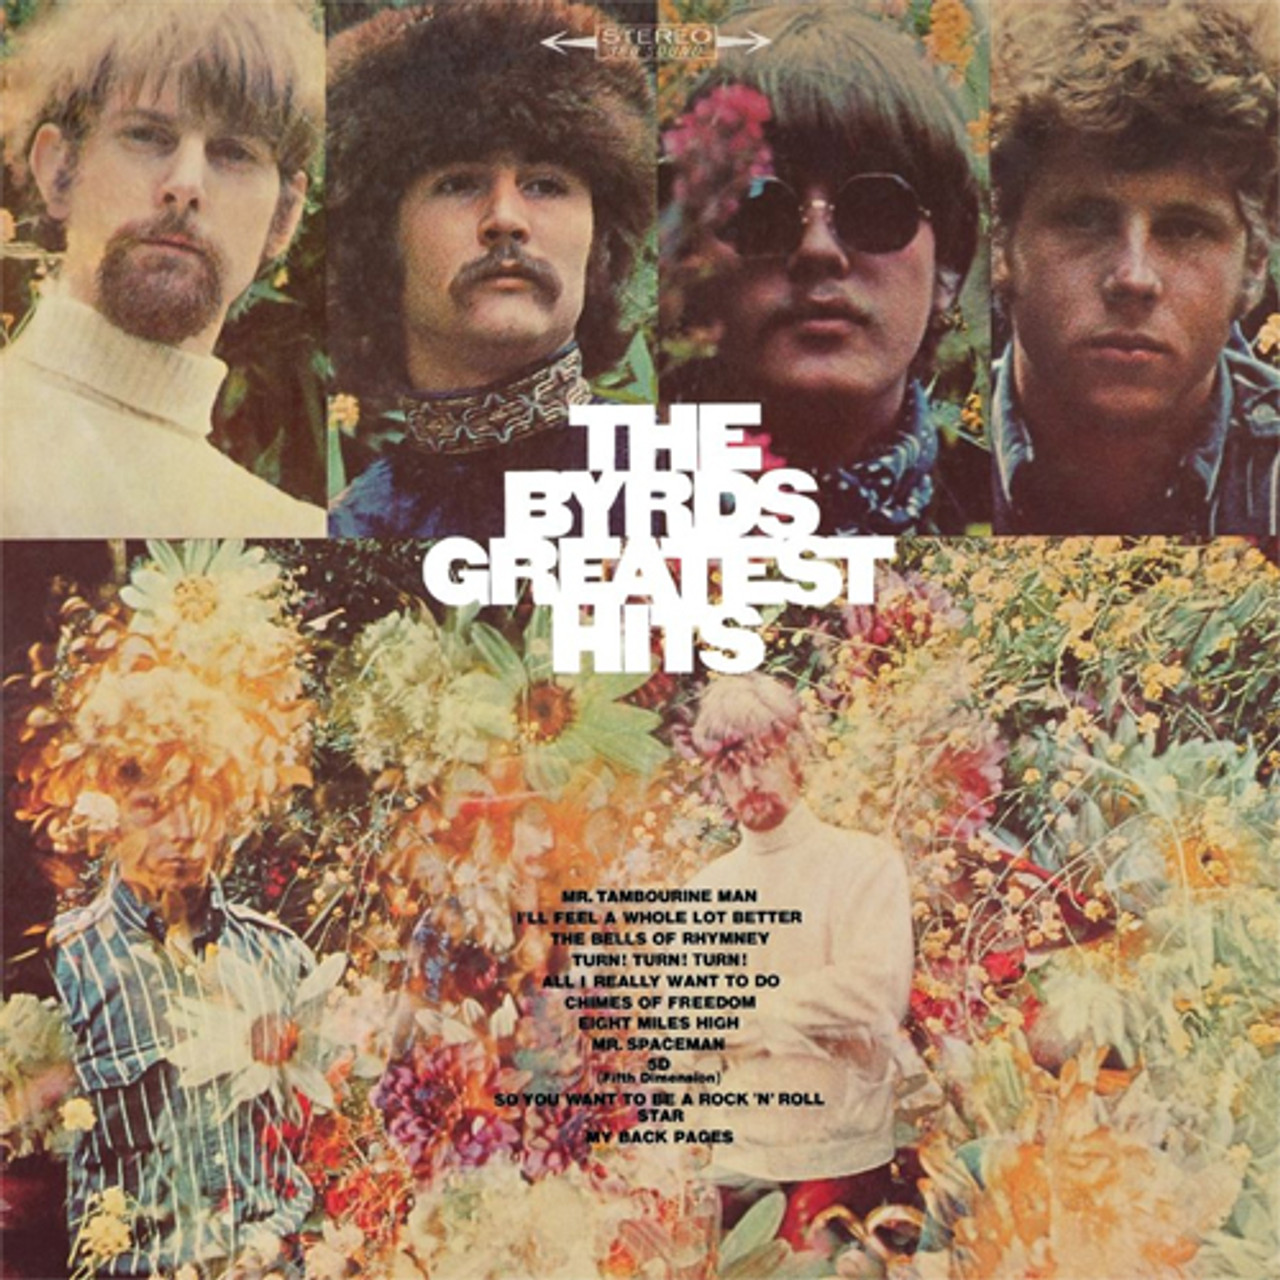 The Byrds Released “Greatest Hits” 55 Years Ago Today